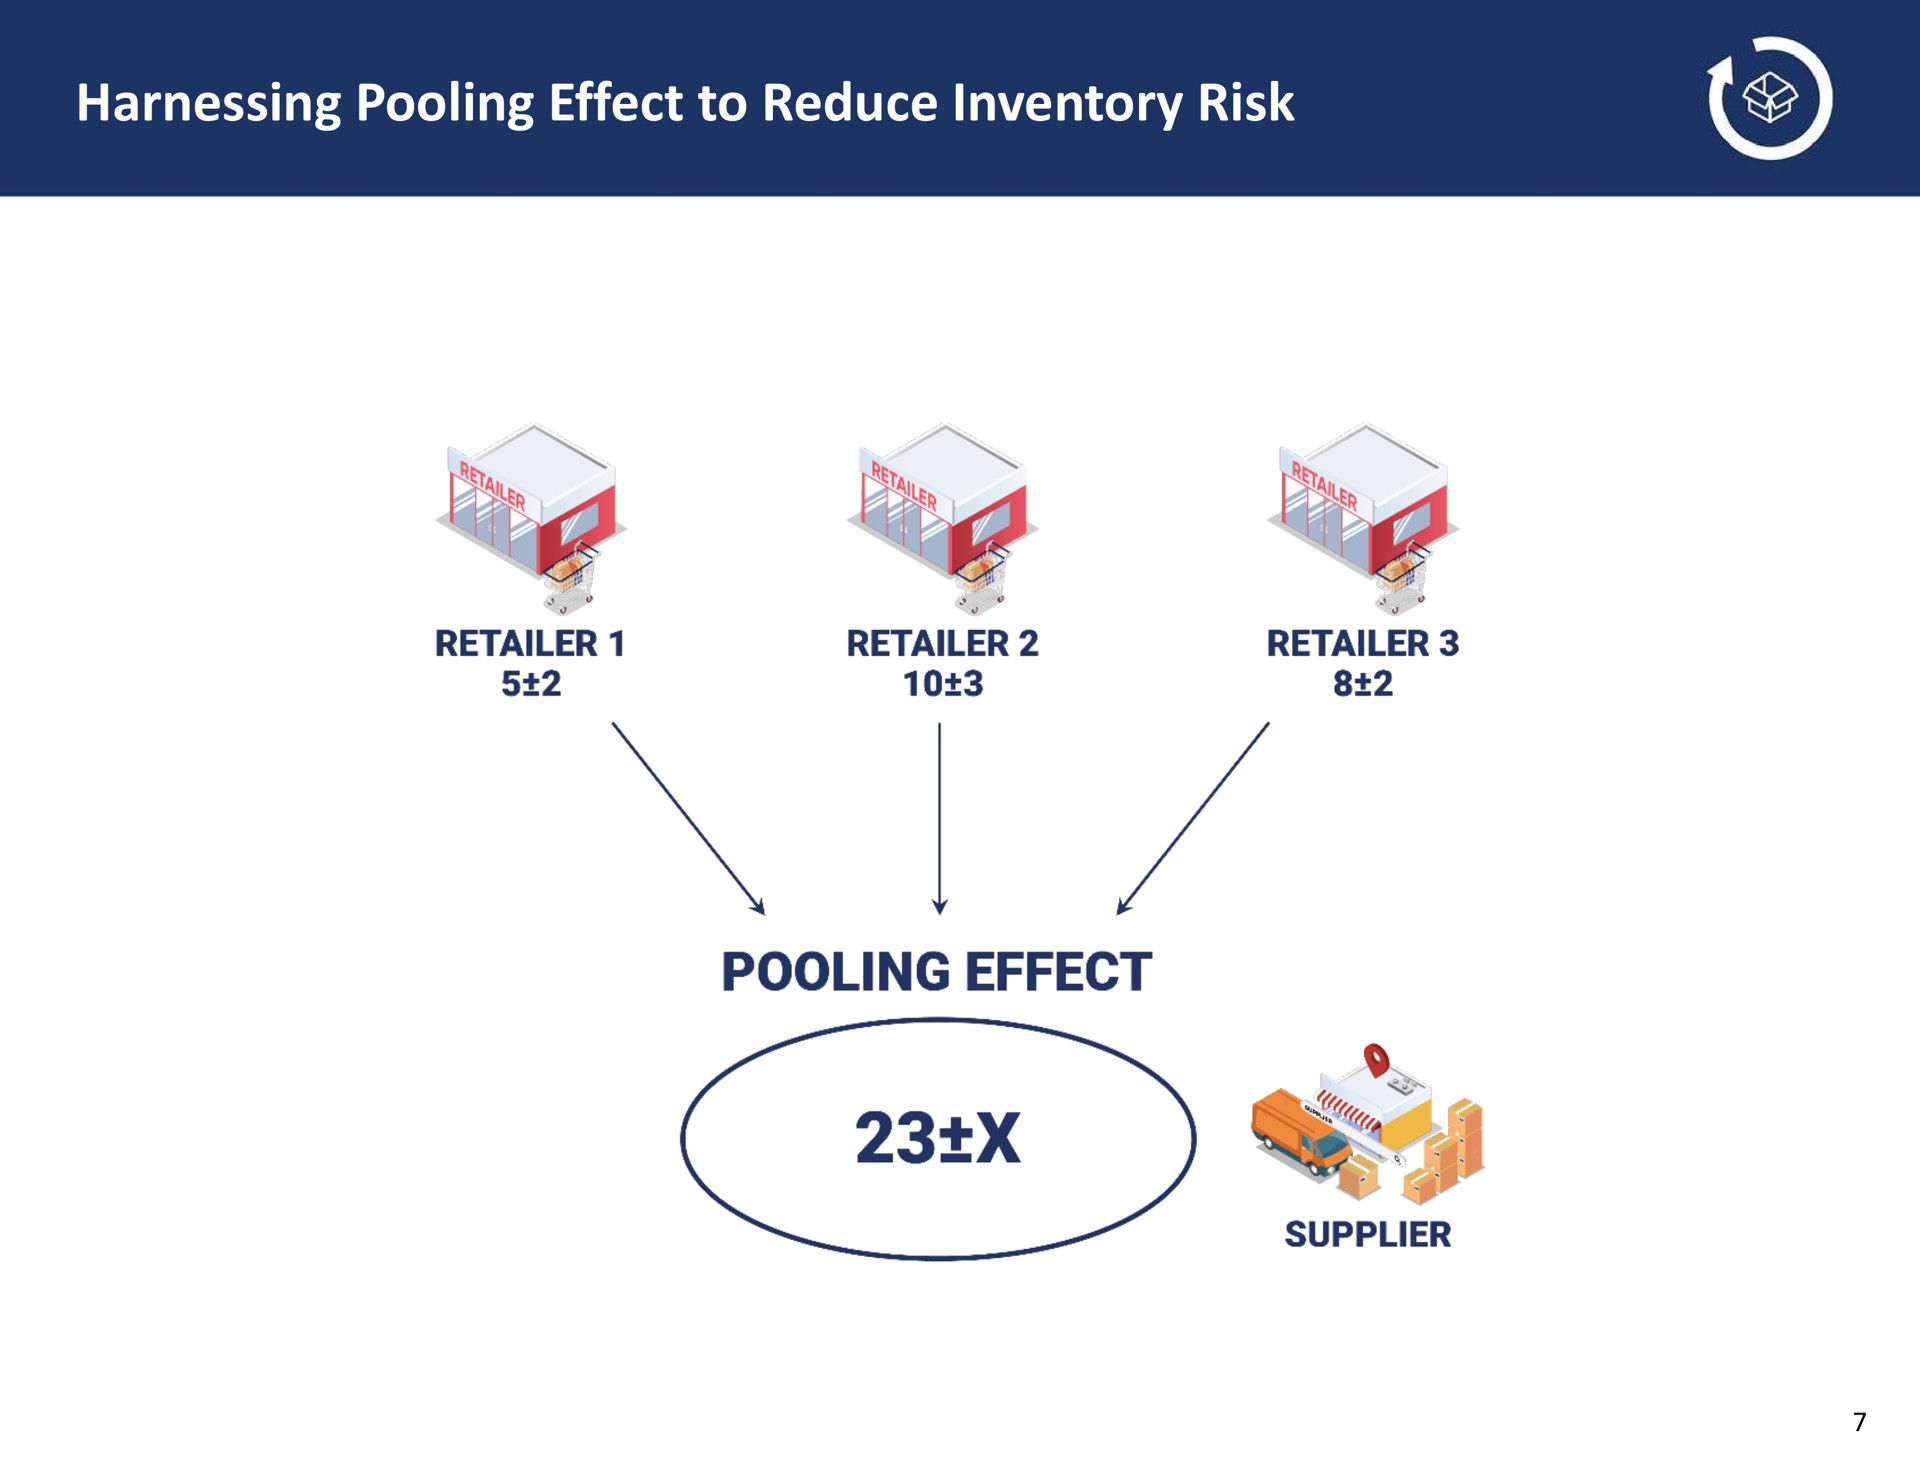 harnessing pooling effect to reduce inventory risk | GigaCloud Technology